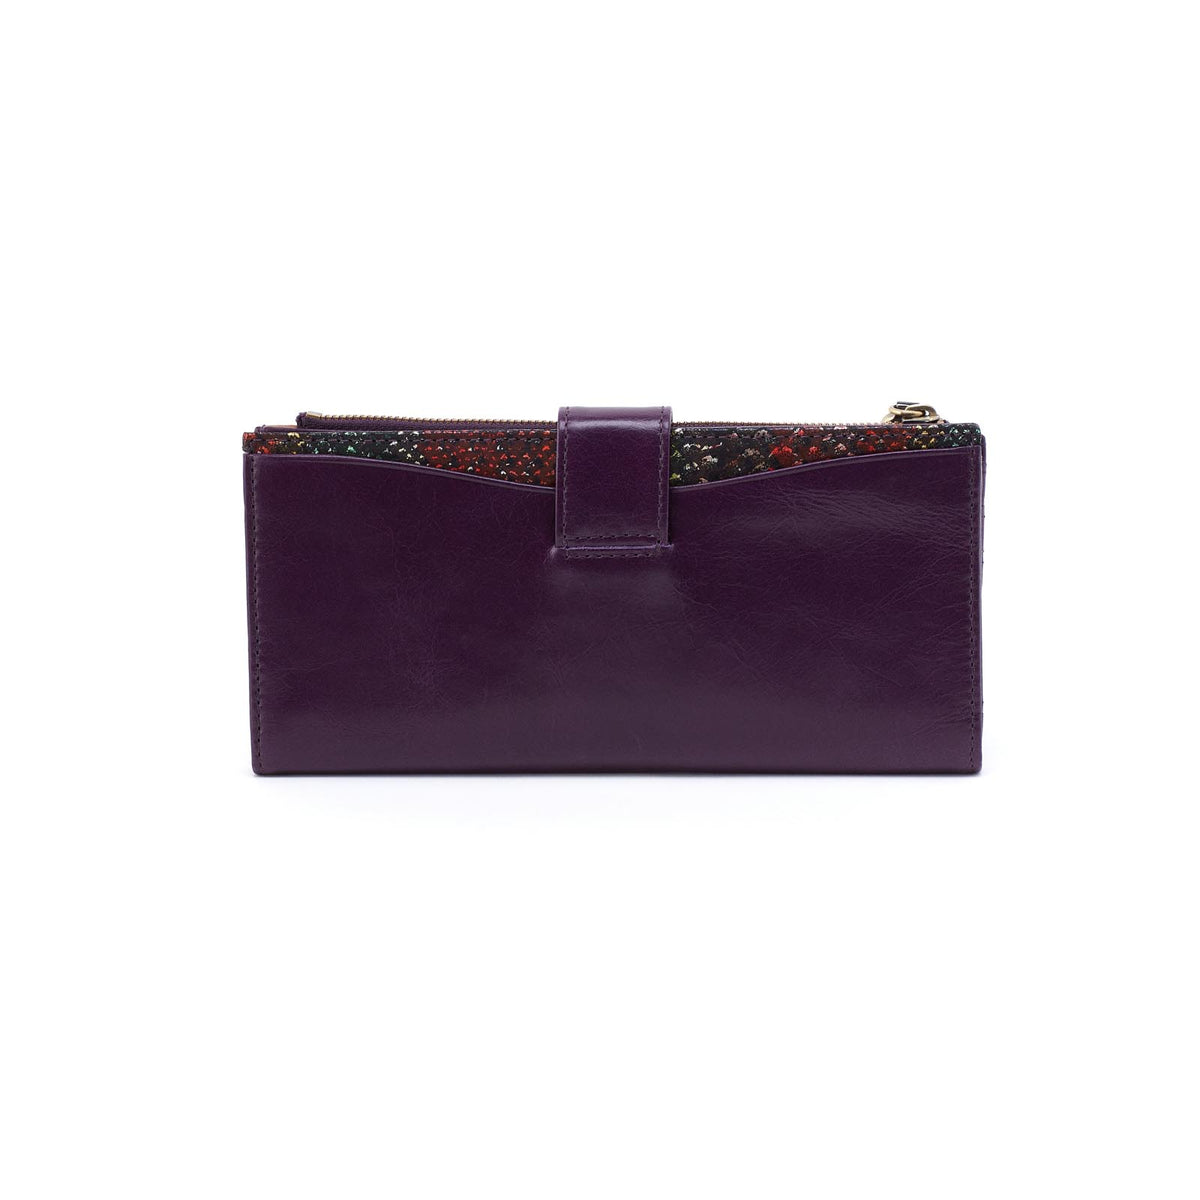 Hobo Max Continental Wallet, Deep Purple/Holiday Stripe - Statement Boutique